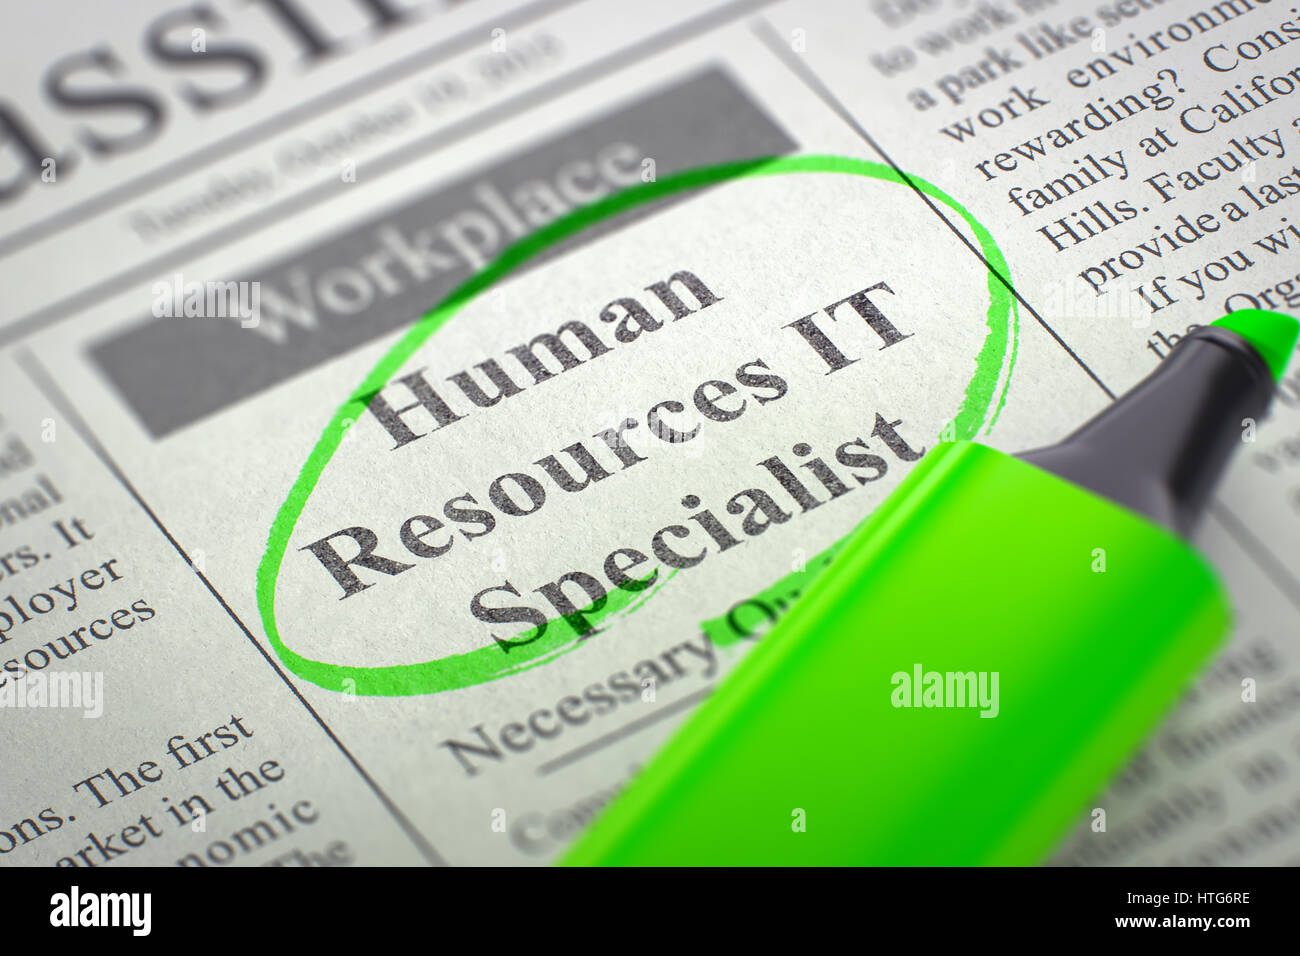 Human Resources IT Specialist. Newspaper with the Small Advertising, Circled with a Green Highlighter. Blurred Image. Selective focus. Concept of Recr Stock Photo